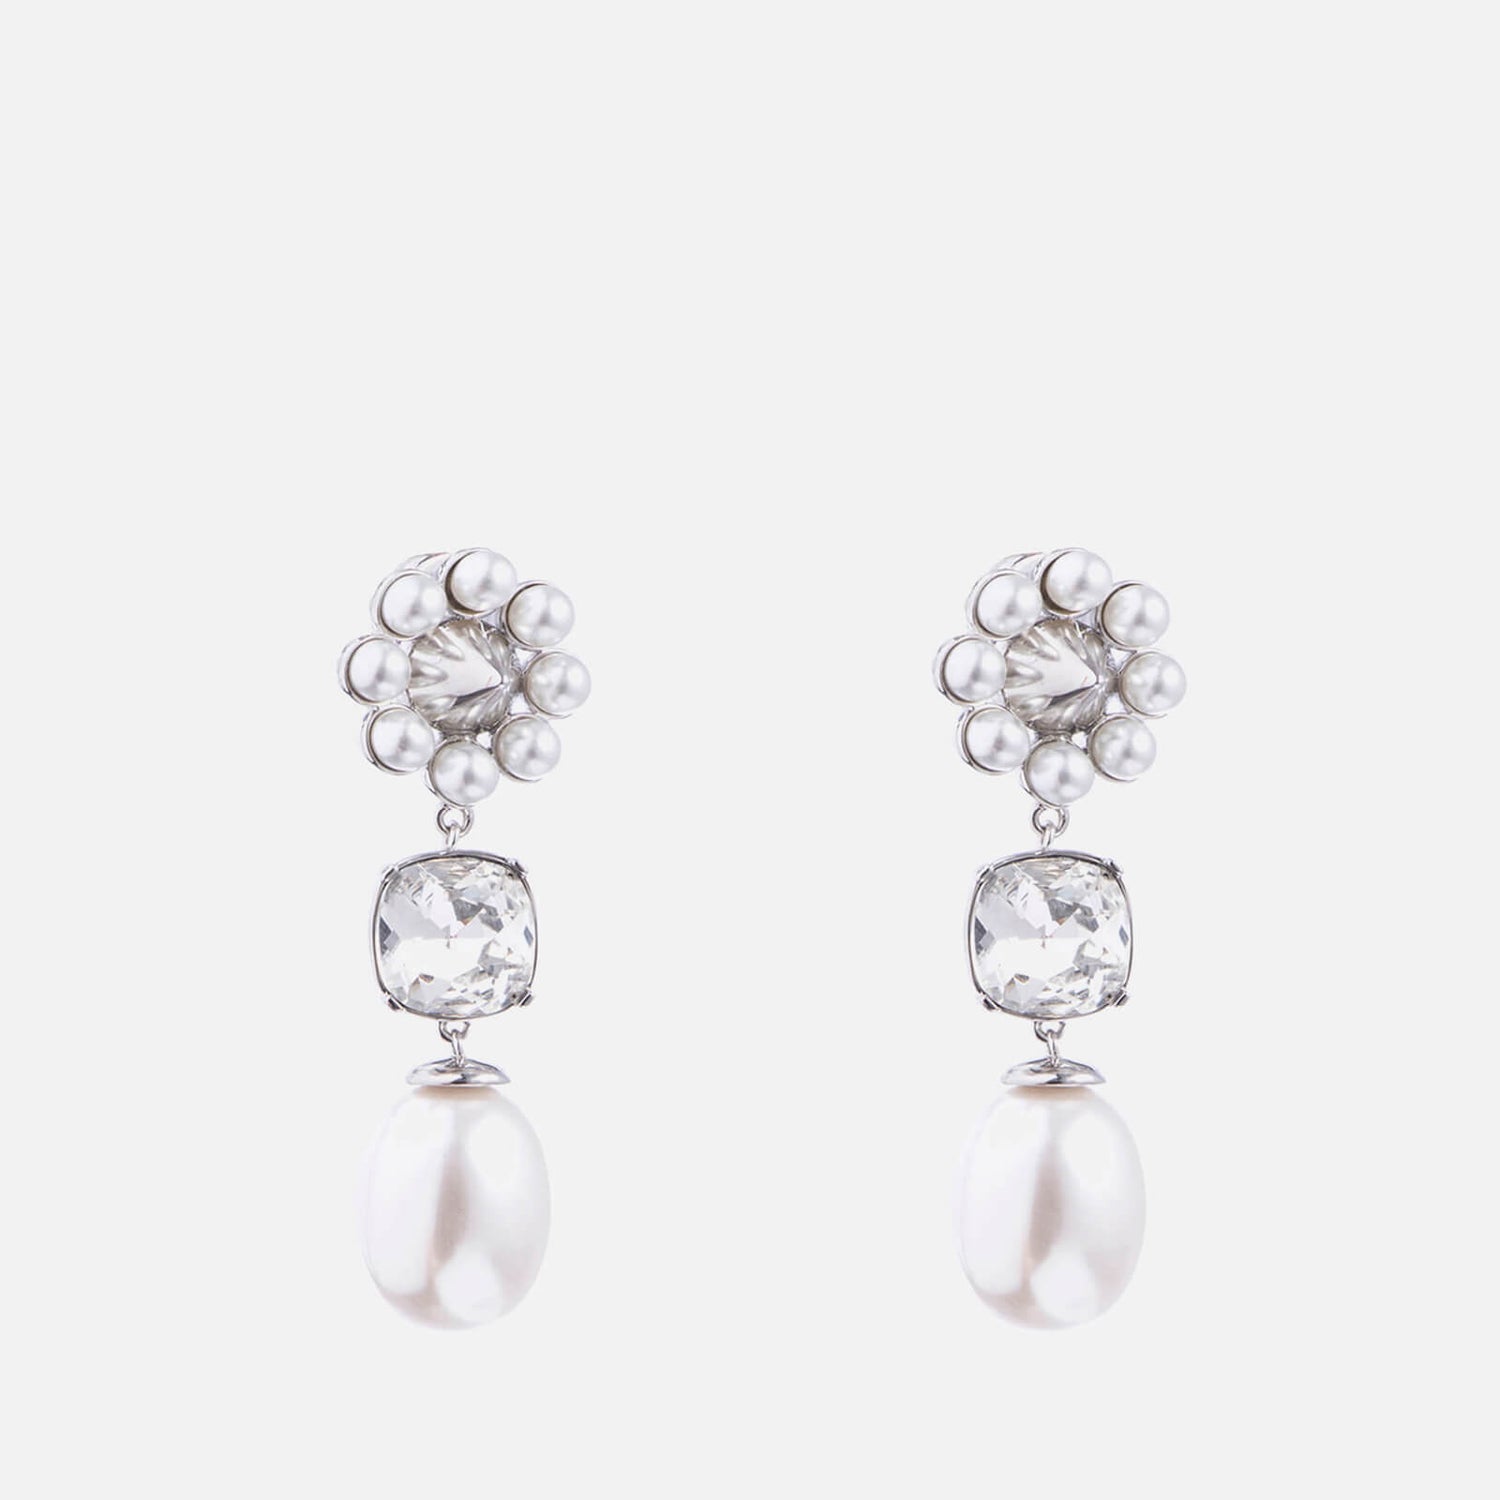 Shrimps Terry Silver-Tone, Faux Pearl and Crystal Earrings